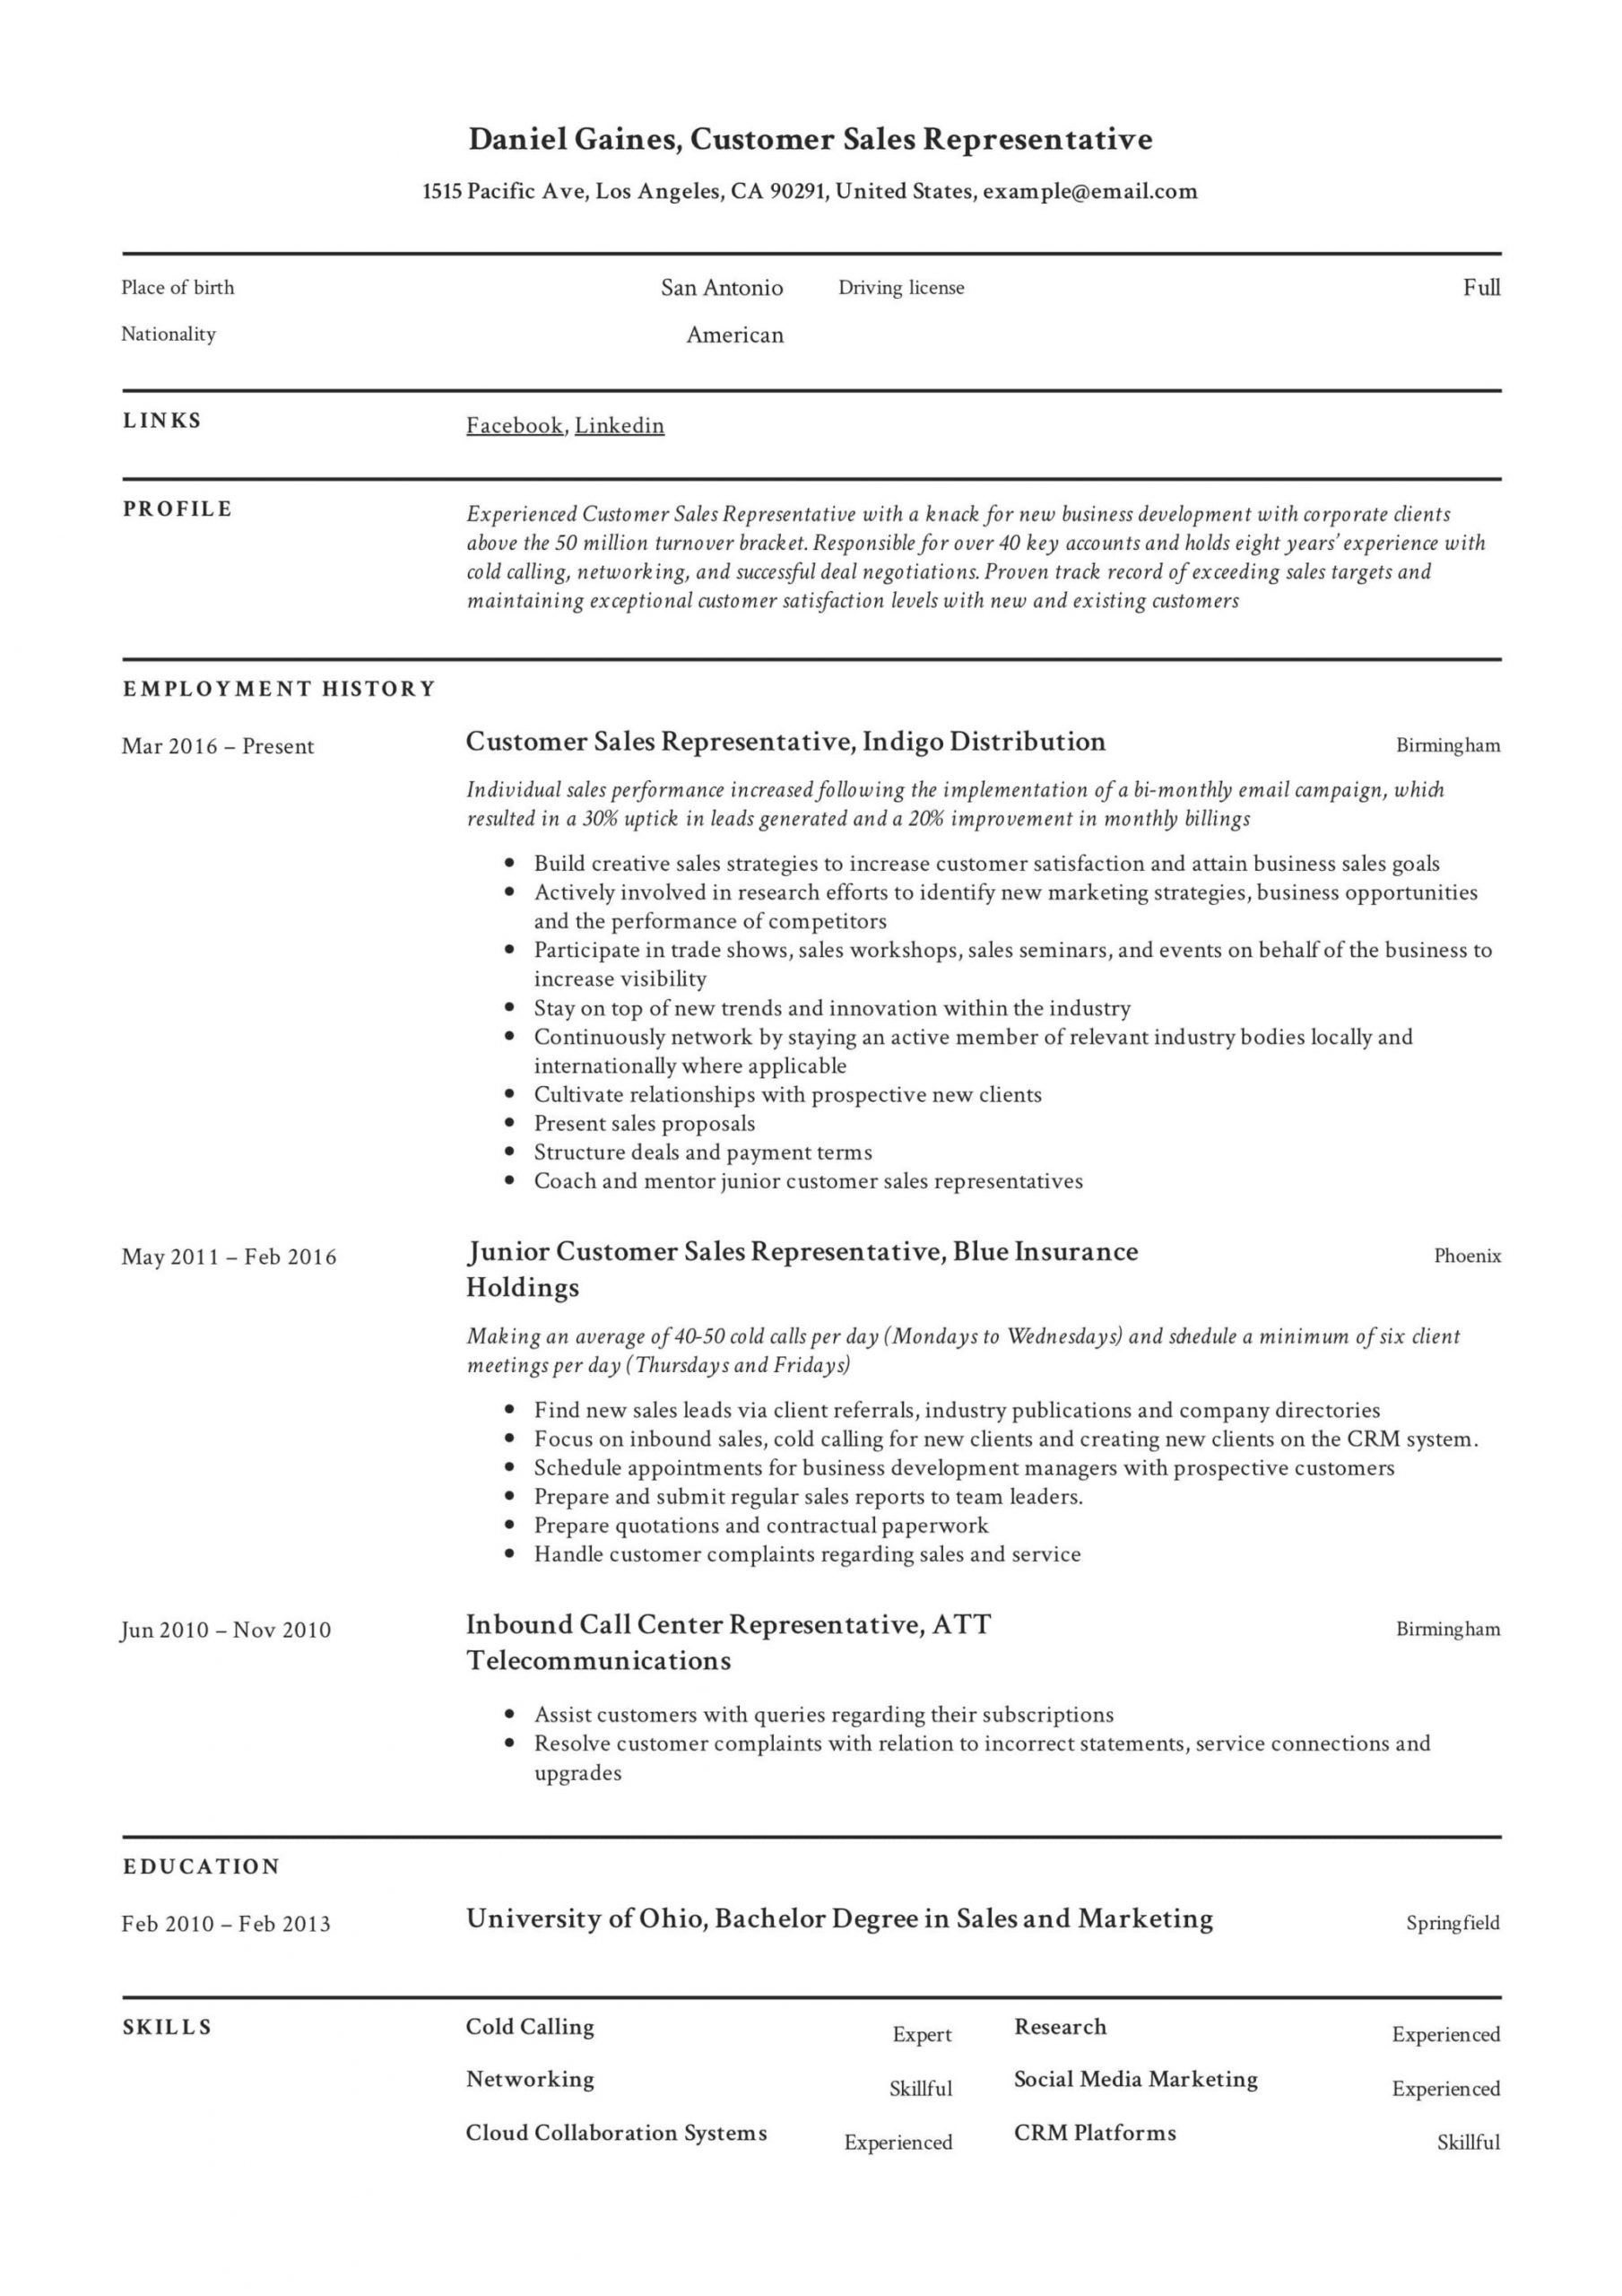 Sample Resume for Sales Representative with No Experience Resume for Medical Representative without Experience. Eye-grabbing …